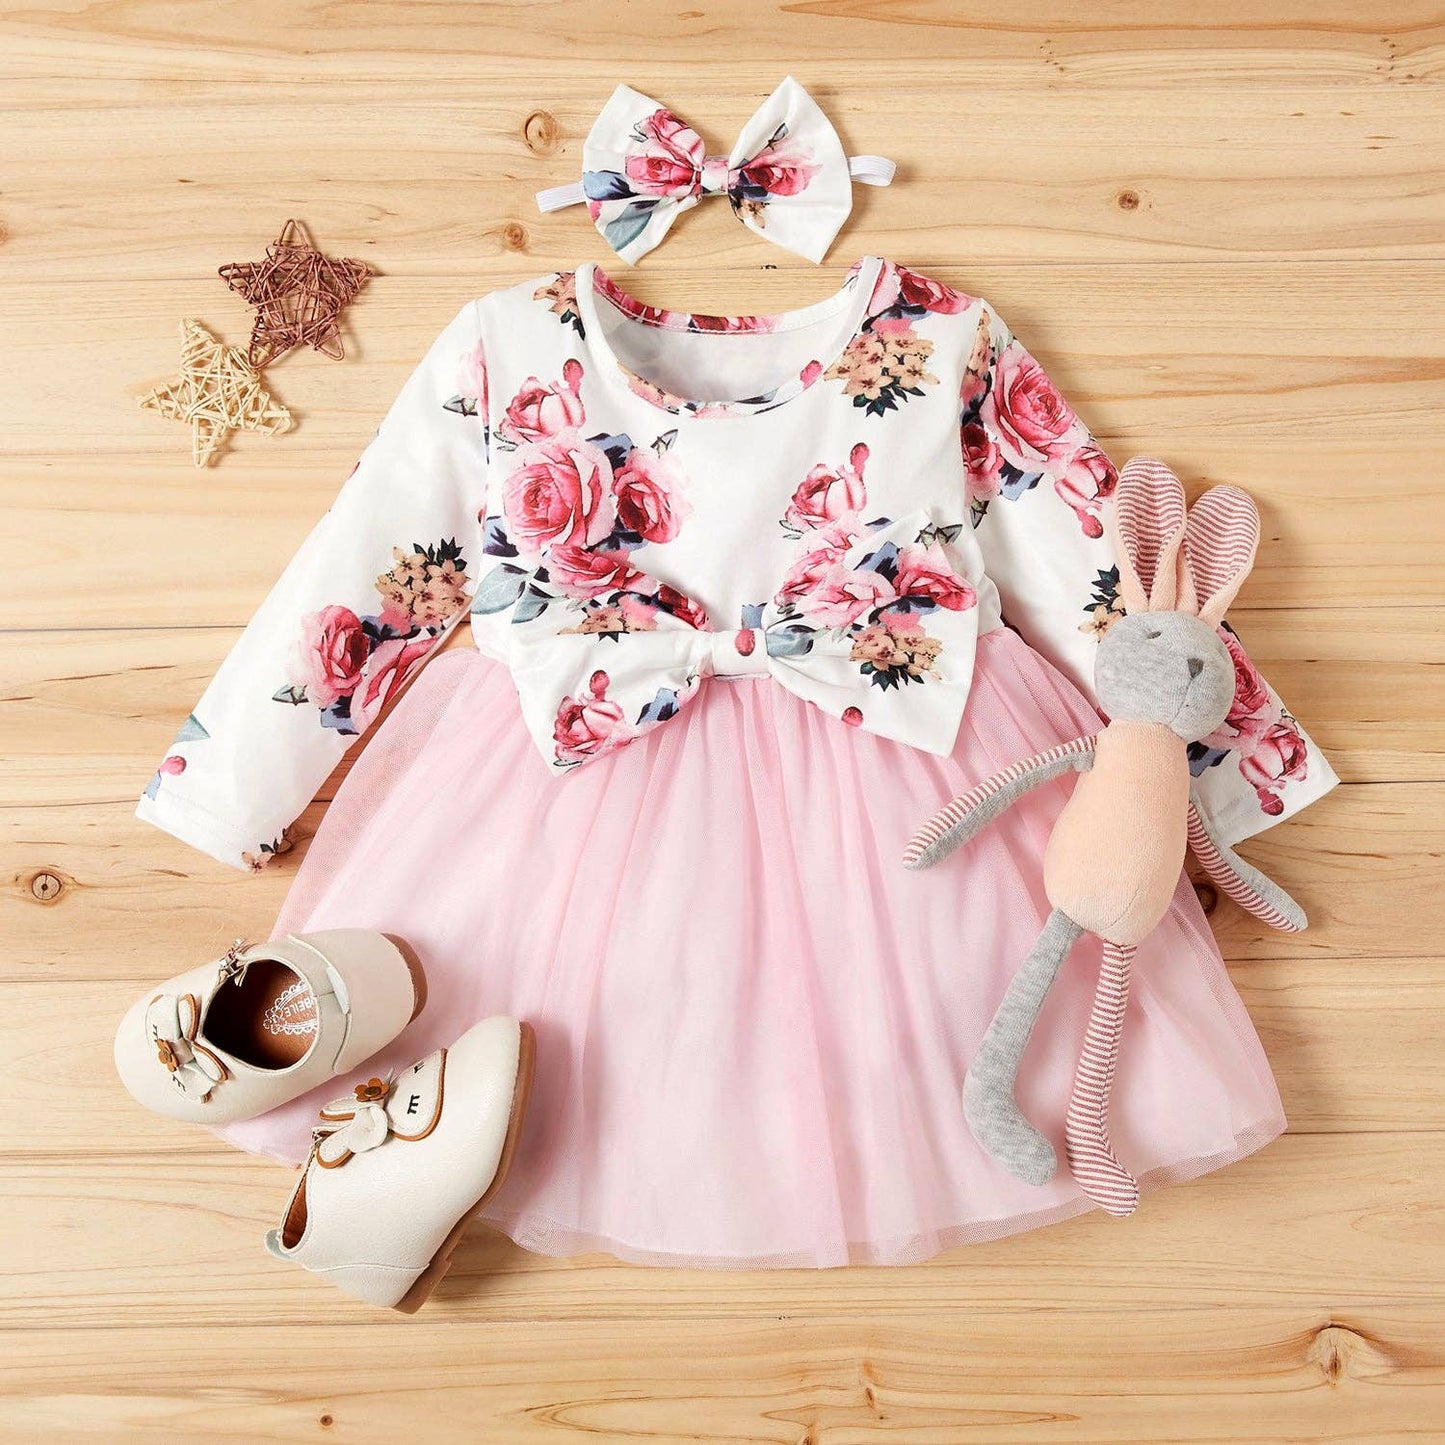 2-piece Girl Tulle Dress with Headband Set (No Shoes )